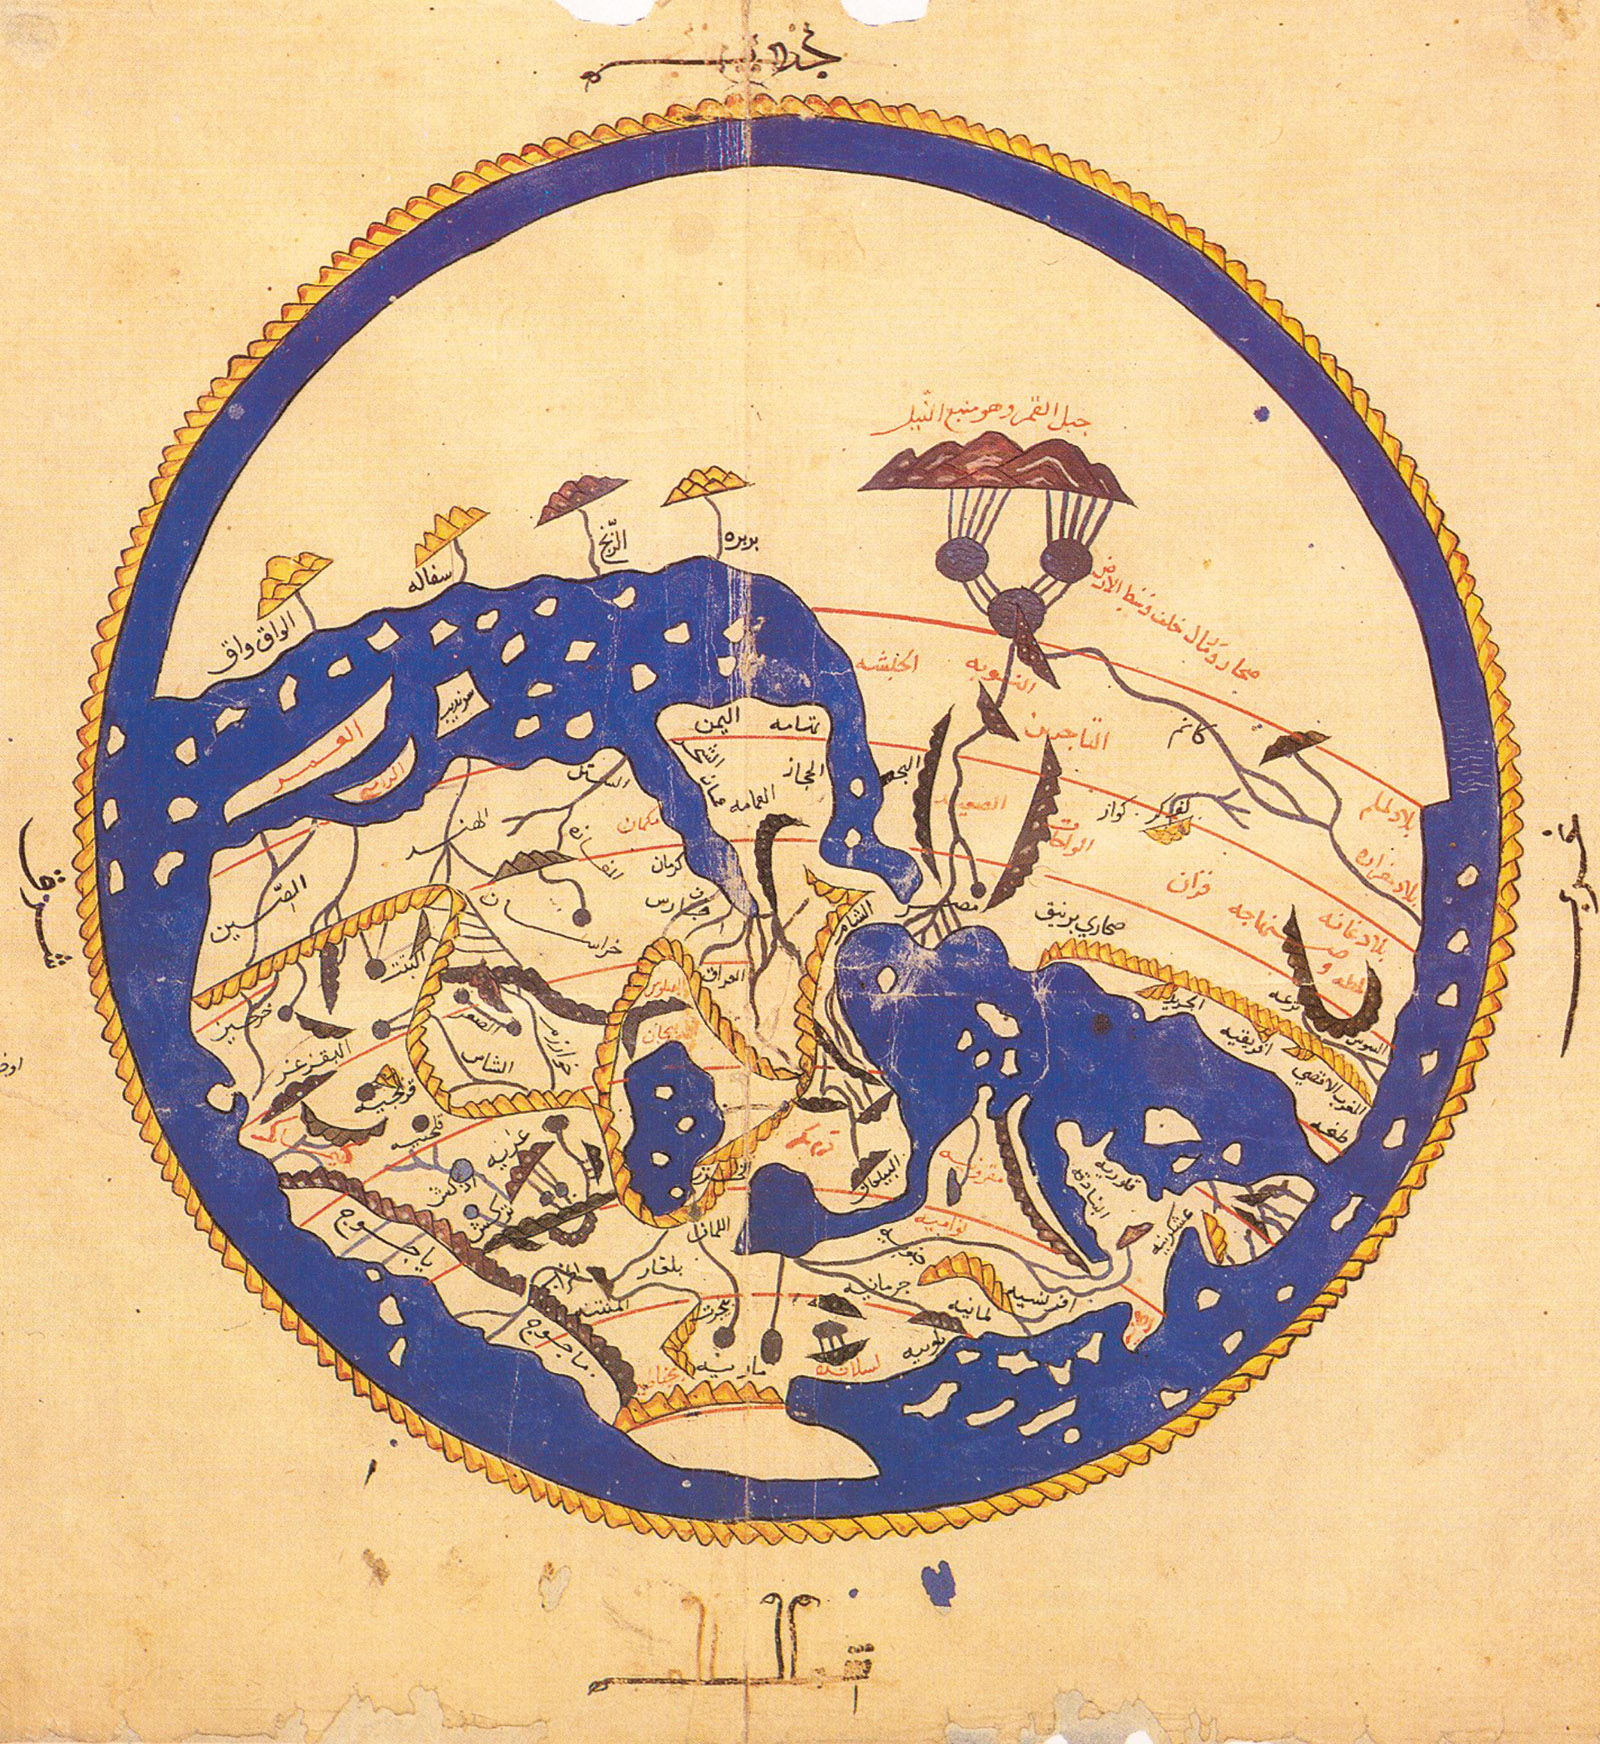 A map of the world from Entertainment for He Who Longs to Travel the World, a geographical book from 1154 by the Arab scholar Muhammad al-Idrisi. The map shows the south at the top, as was customary in early Islamic cartography.